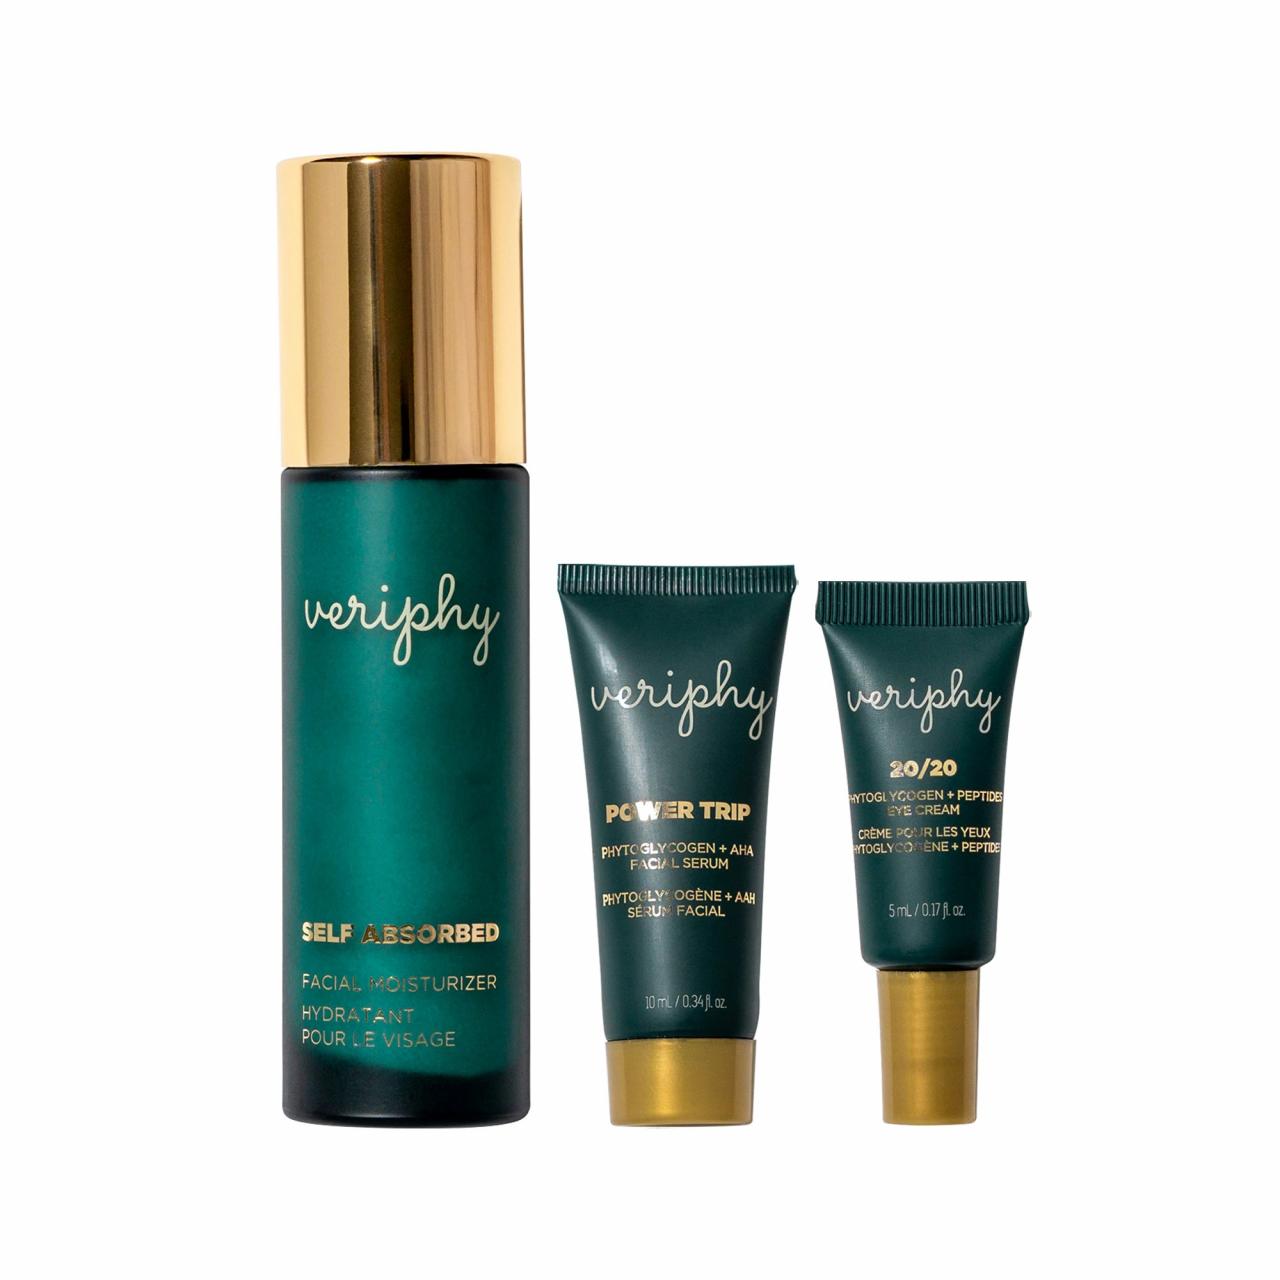 Discover Veriphy Self-Absorbed Moisturizer, The Key to Deeply Nourished Skin